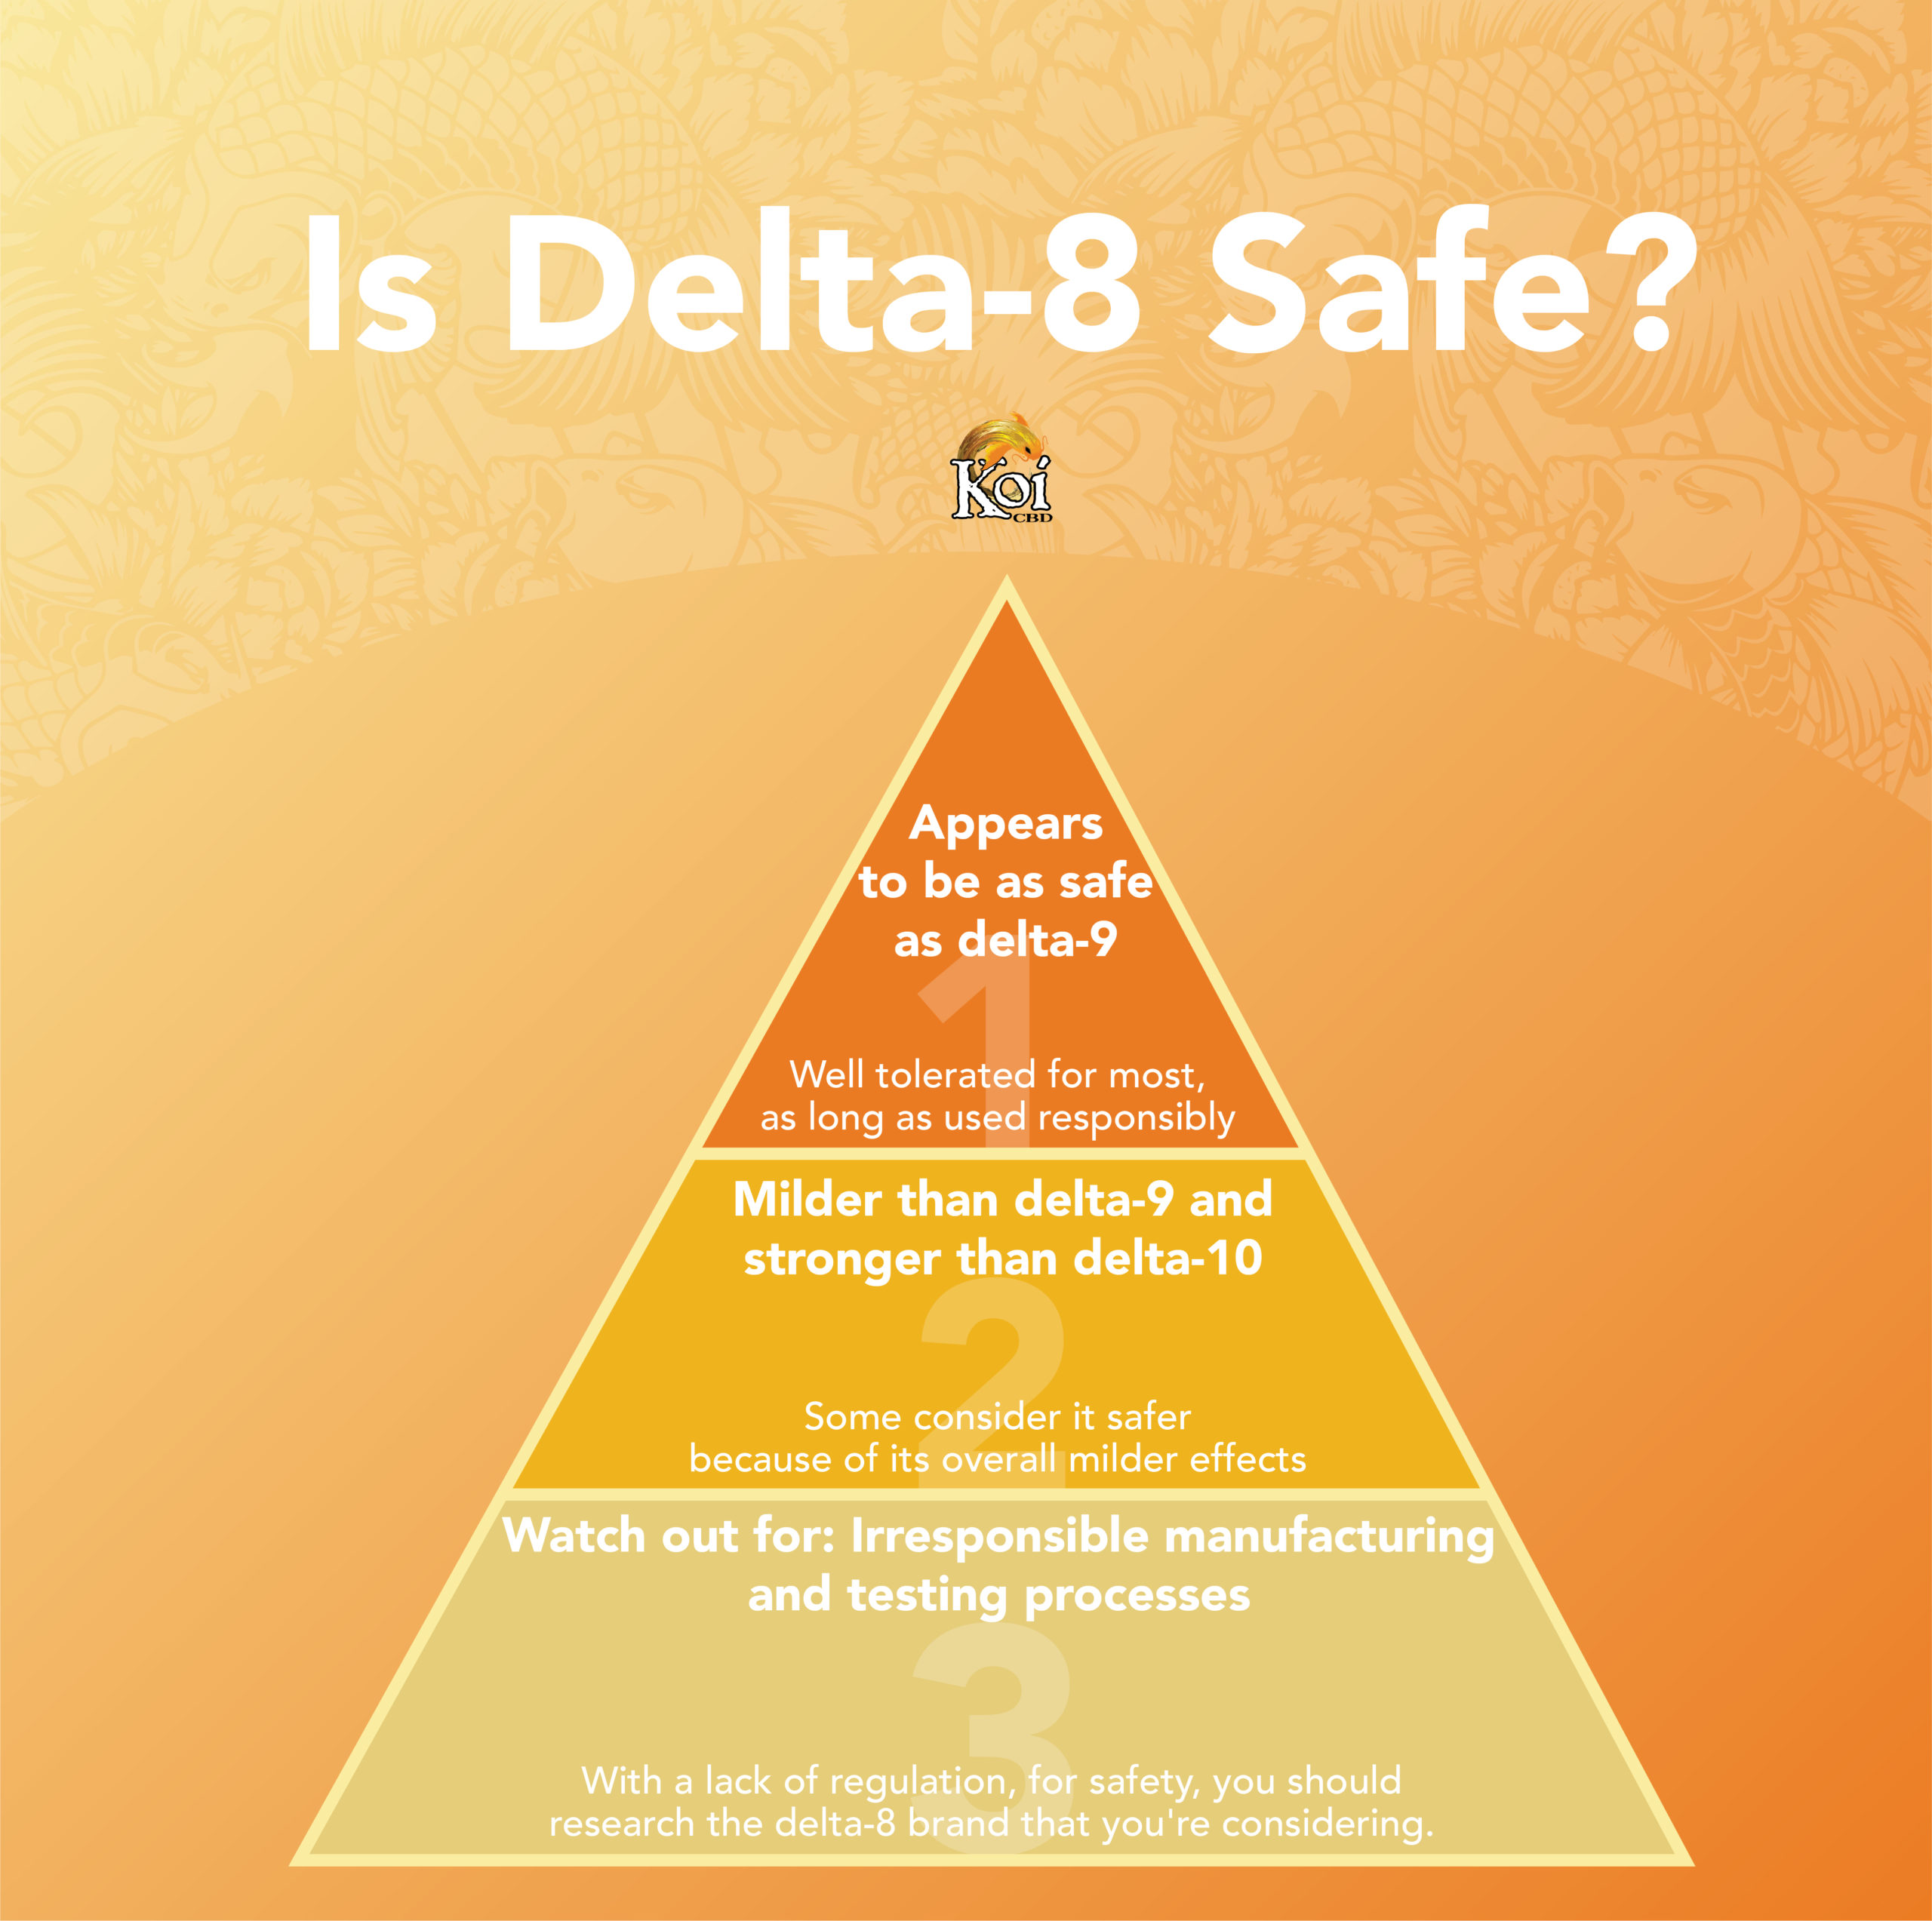 Does delta-8 disqualify you?